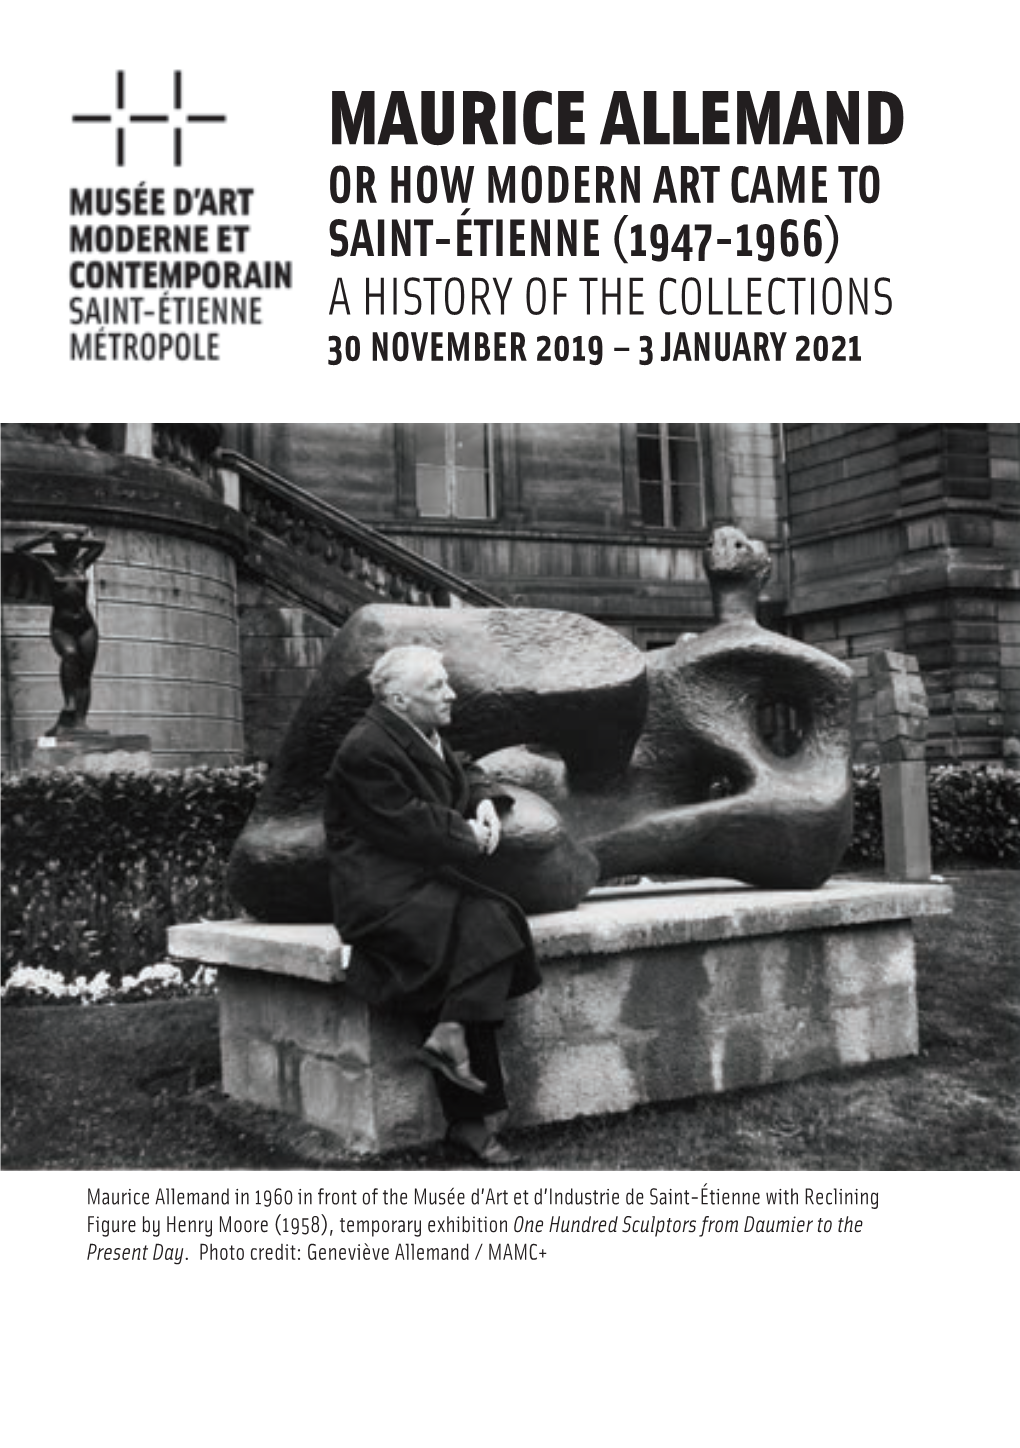 Maurice Allemand Or How Modern Art Came to Saint-Étienne (1947-1966) a History of the Collections 30 November 2019 – 3 January 2021